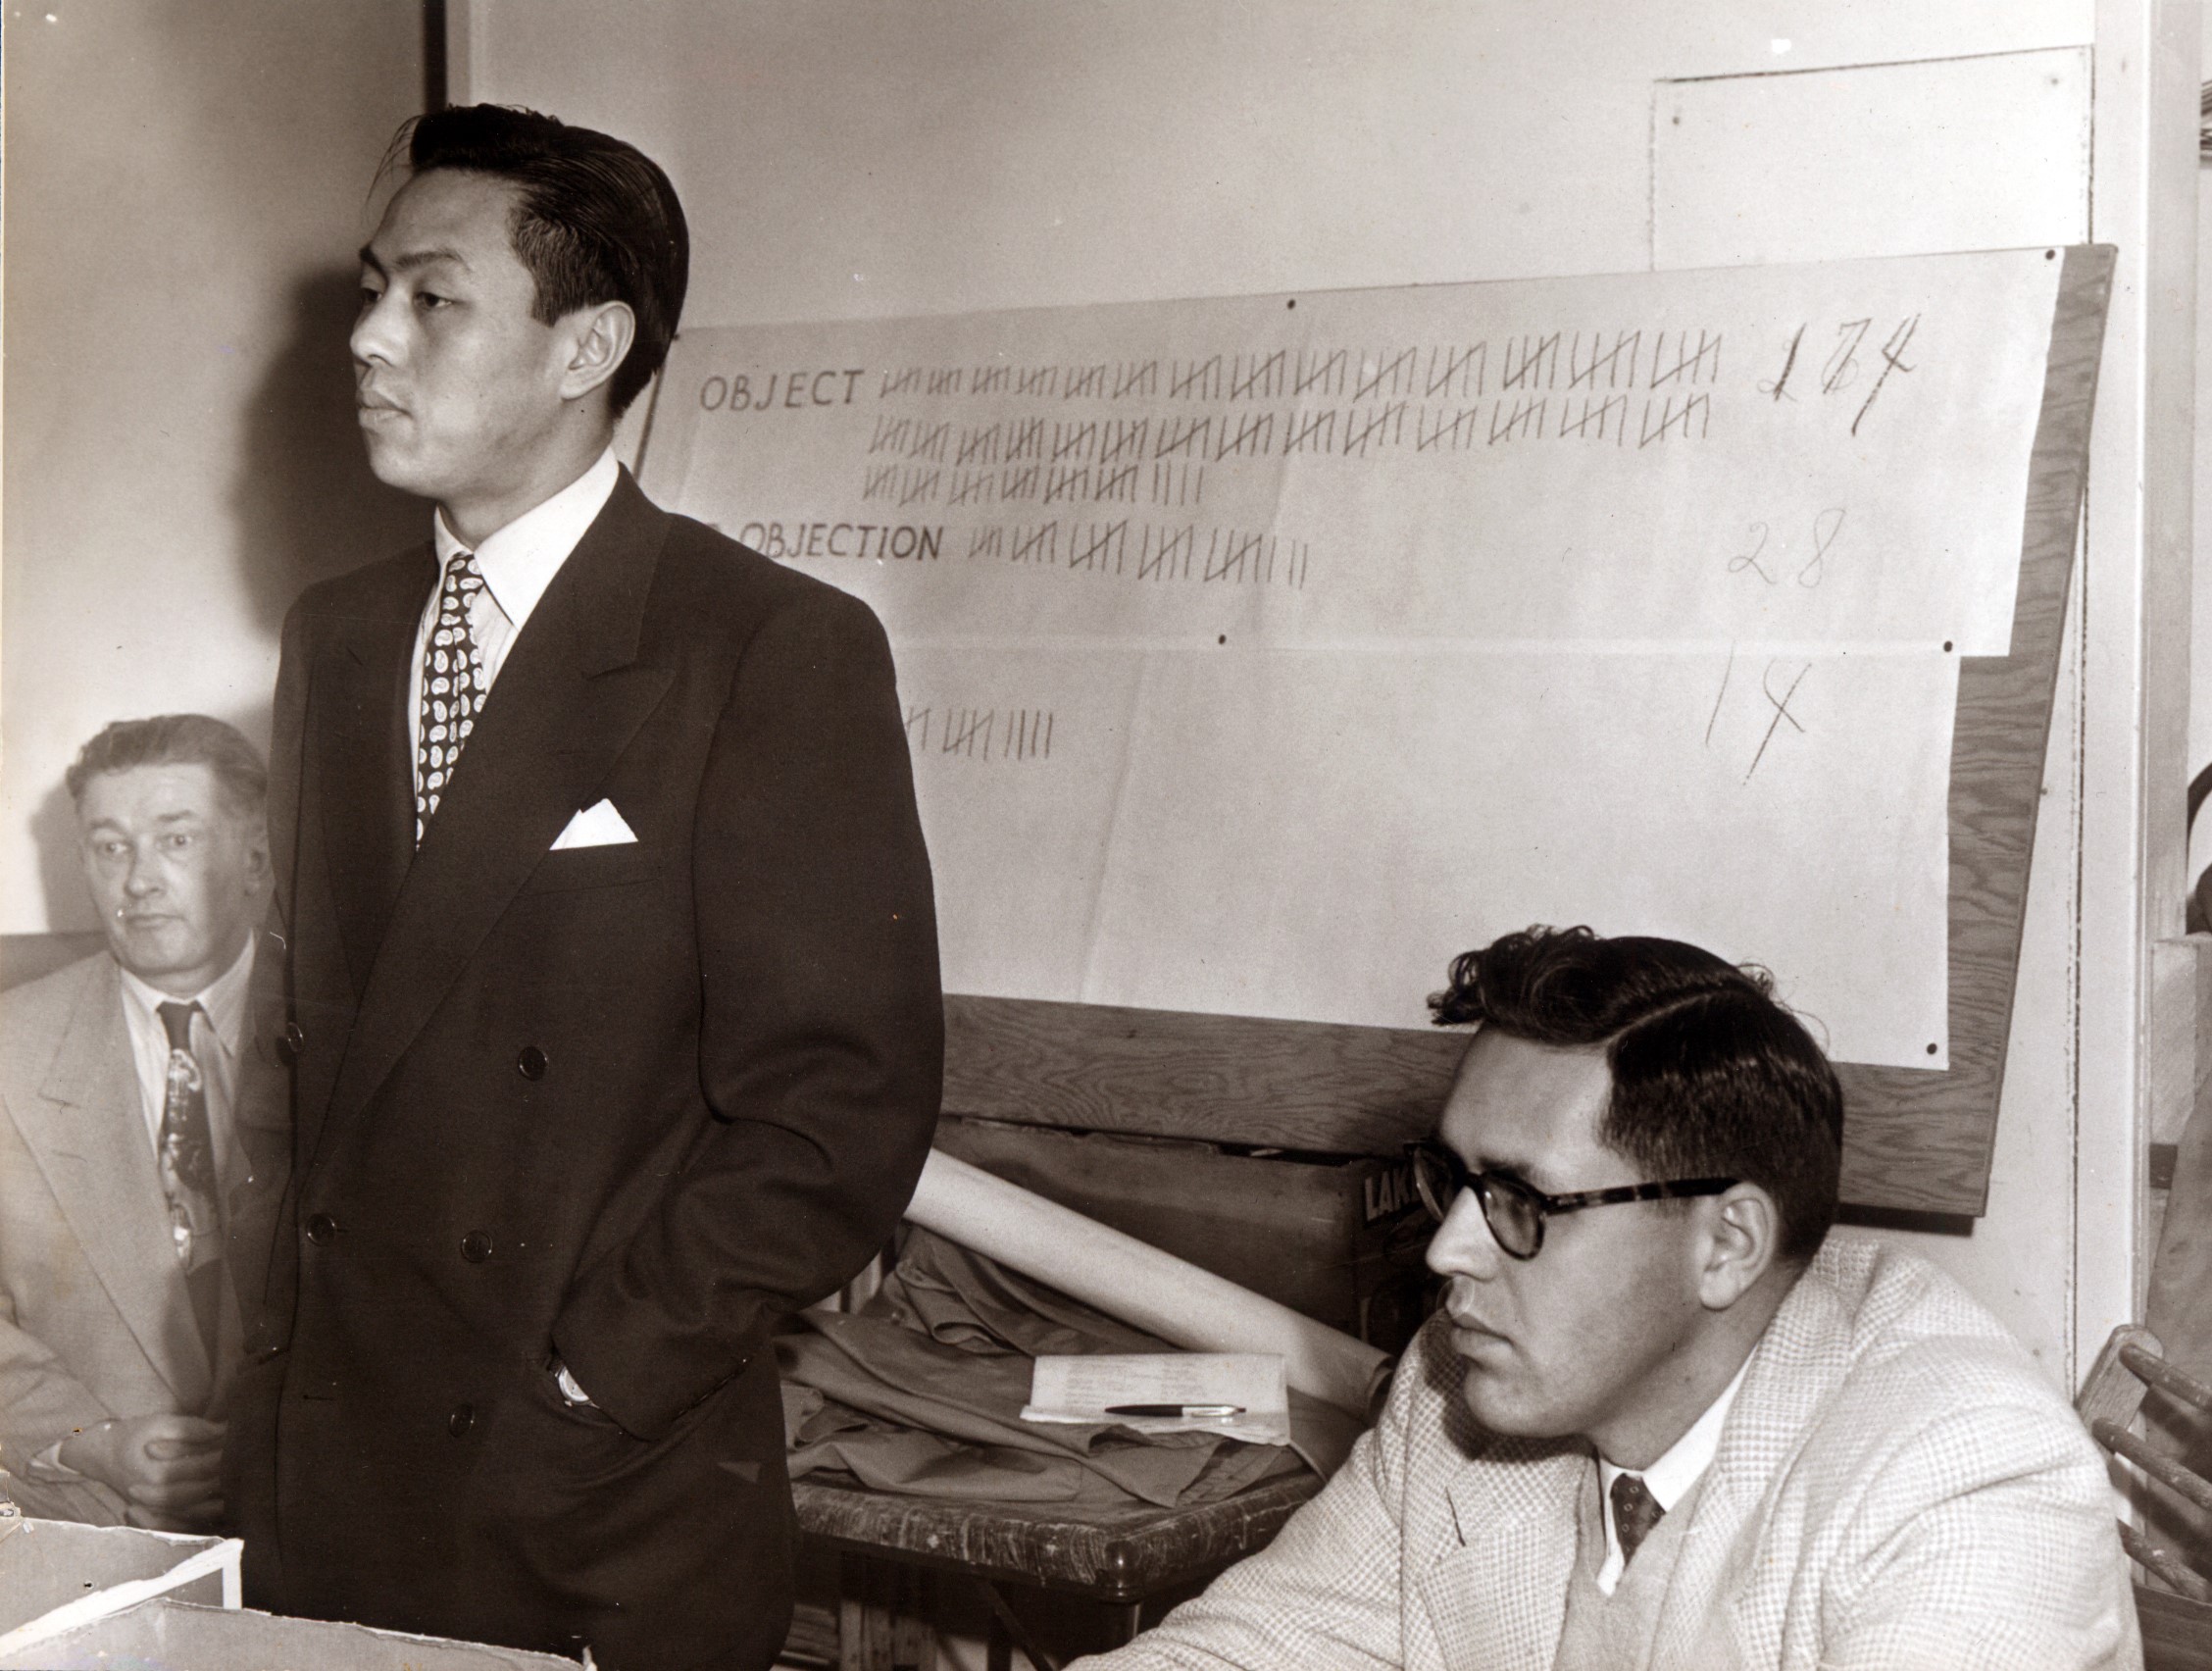 photo: Sing Sheng (left) addresses the crowd of Southwood residents after City Manager Emmons McClung (right) records the results of the vote. The board displays the final tally; 174 out of 202 residents objected to the Sheng family moving into Southwood. Courtesy of San Mateo County Historical Association Collection (SMCHA 2017.54).